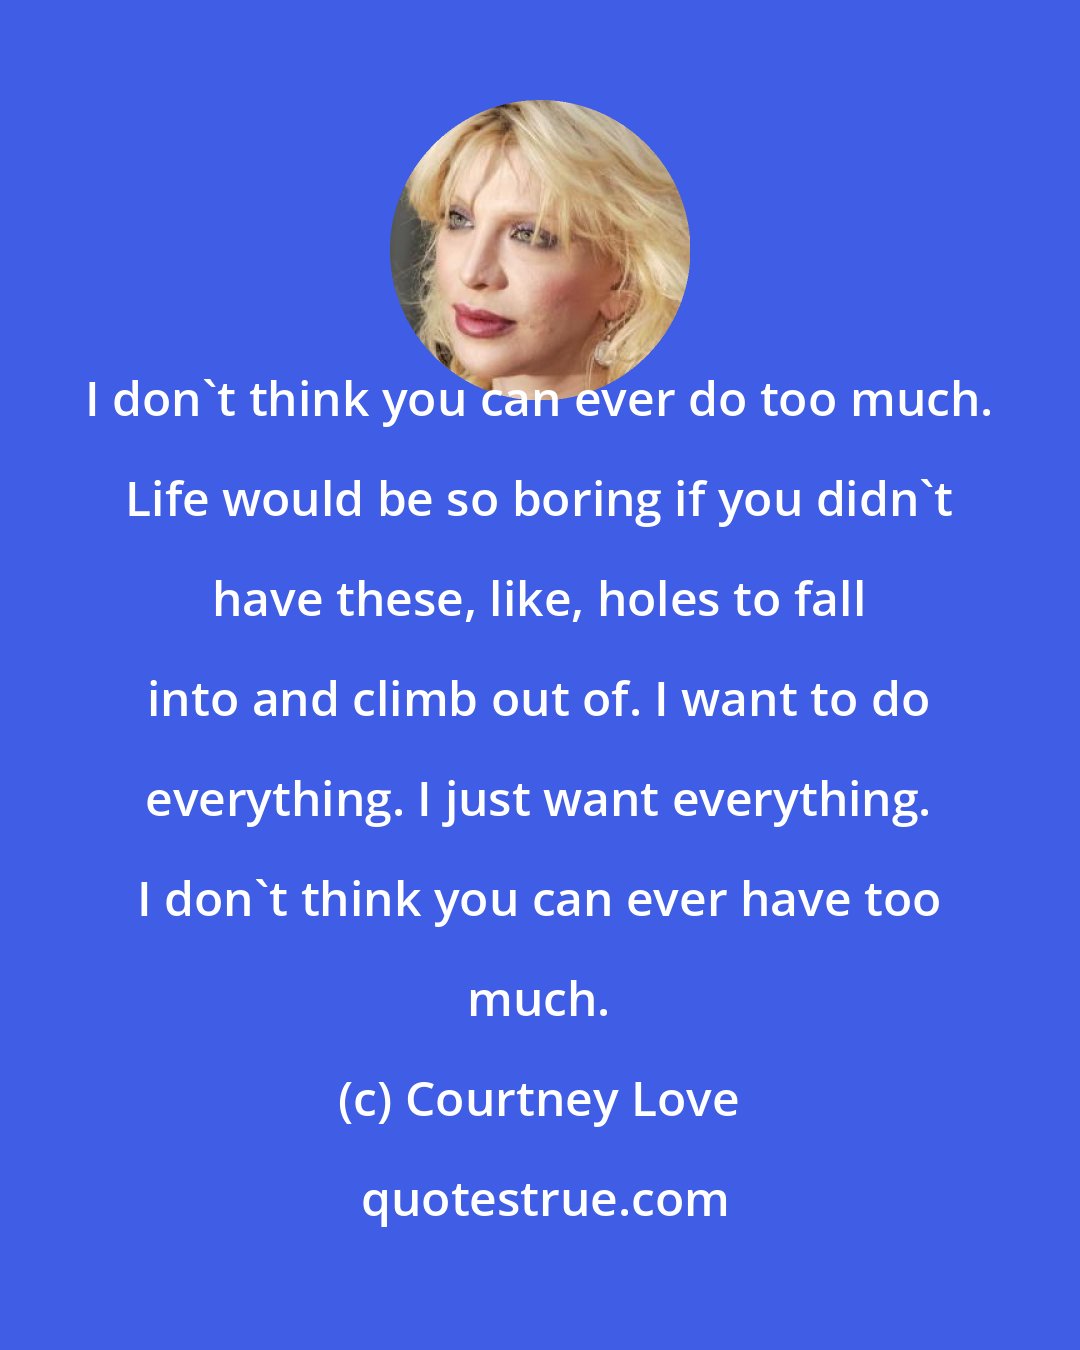 Courtney Love: I don't think you can ever do too much. Life would be so boring if you didn't have these, like, holes to fall into and climb out of. I want to do everything. I just want everything. I don't think you can ever have too much.